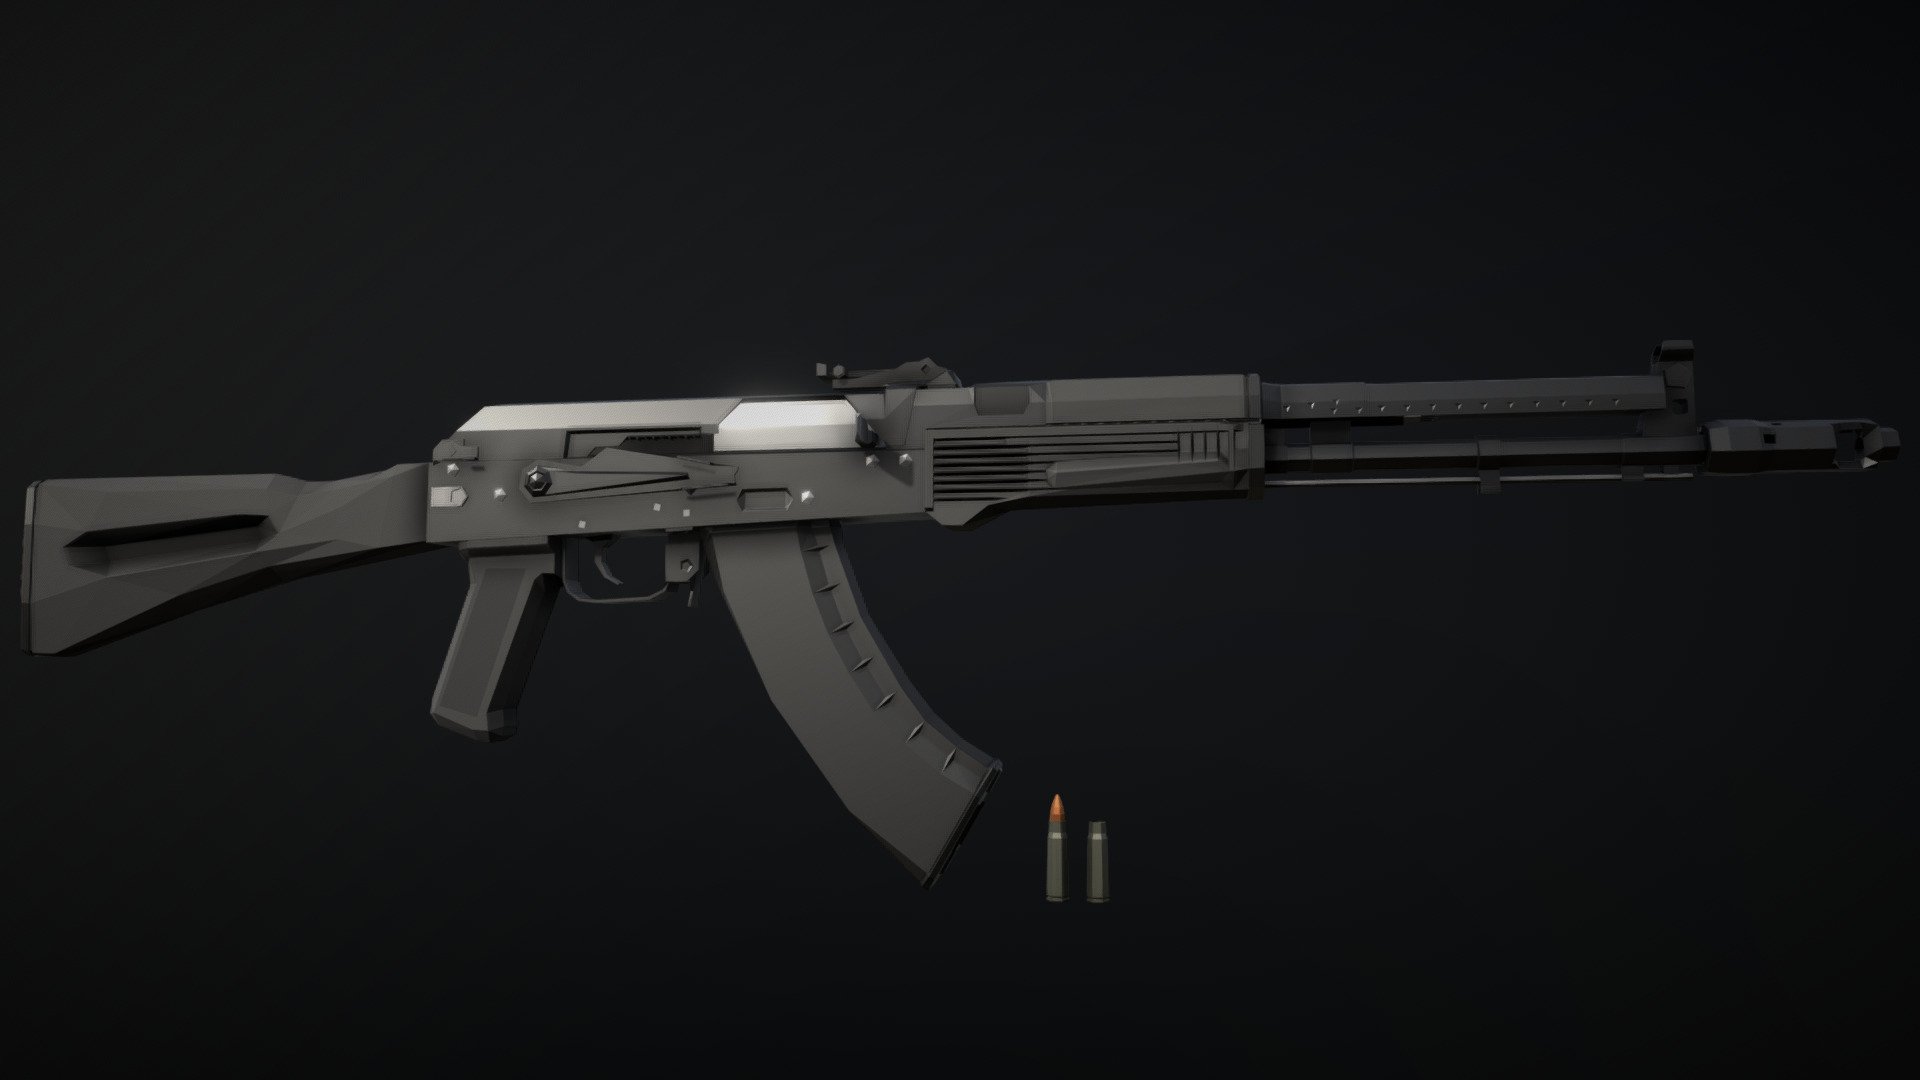 Low-Poly model of an AK-109, an AK variant chambered in 7.62x39, which uses a balanced recoil system to greatly reduce recoil and thus increase accuracy during burst/automatic fire 3d model